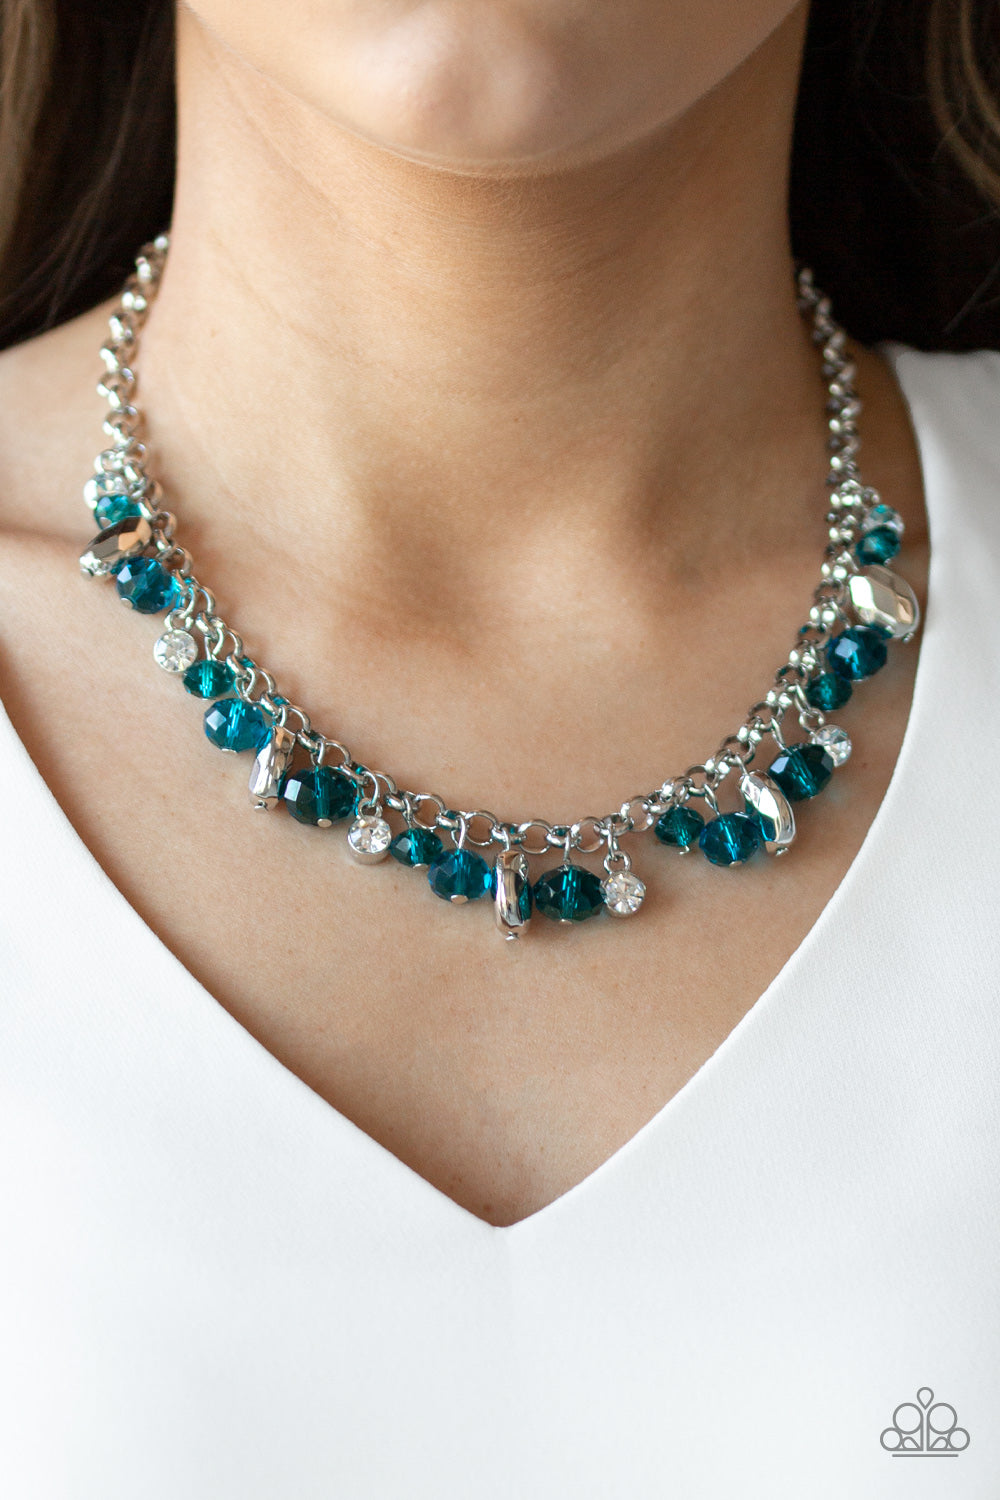 Downstage Dazzle - Blue Silver Necklace - Shine With Aloha, LLC